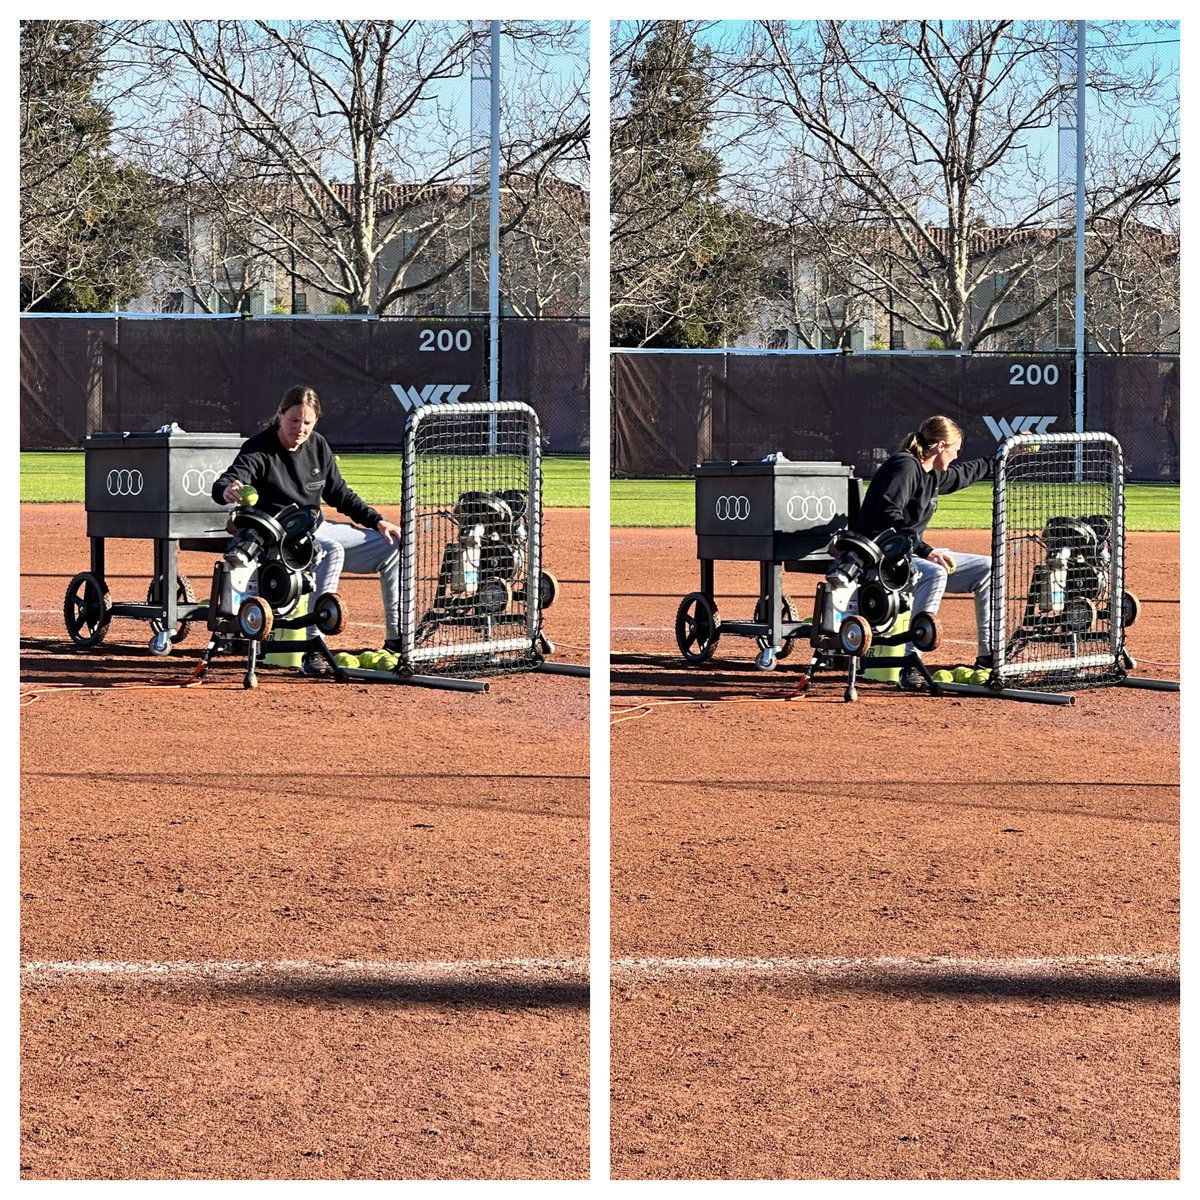 Double the machines, double the hitters, double the fun…let’s go hit some doubles in Vegas @SCUSoftball @kristi_villar